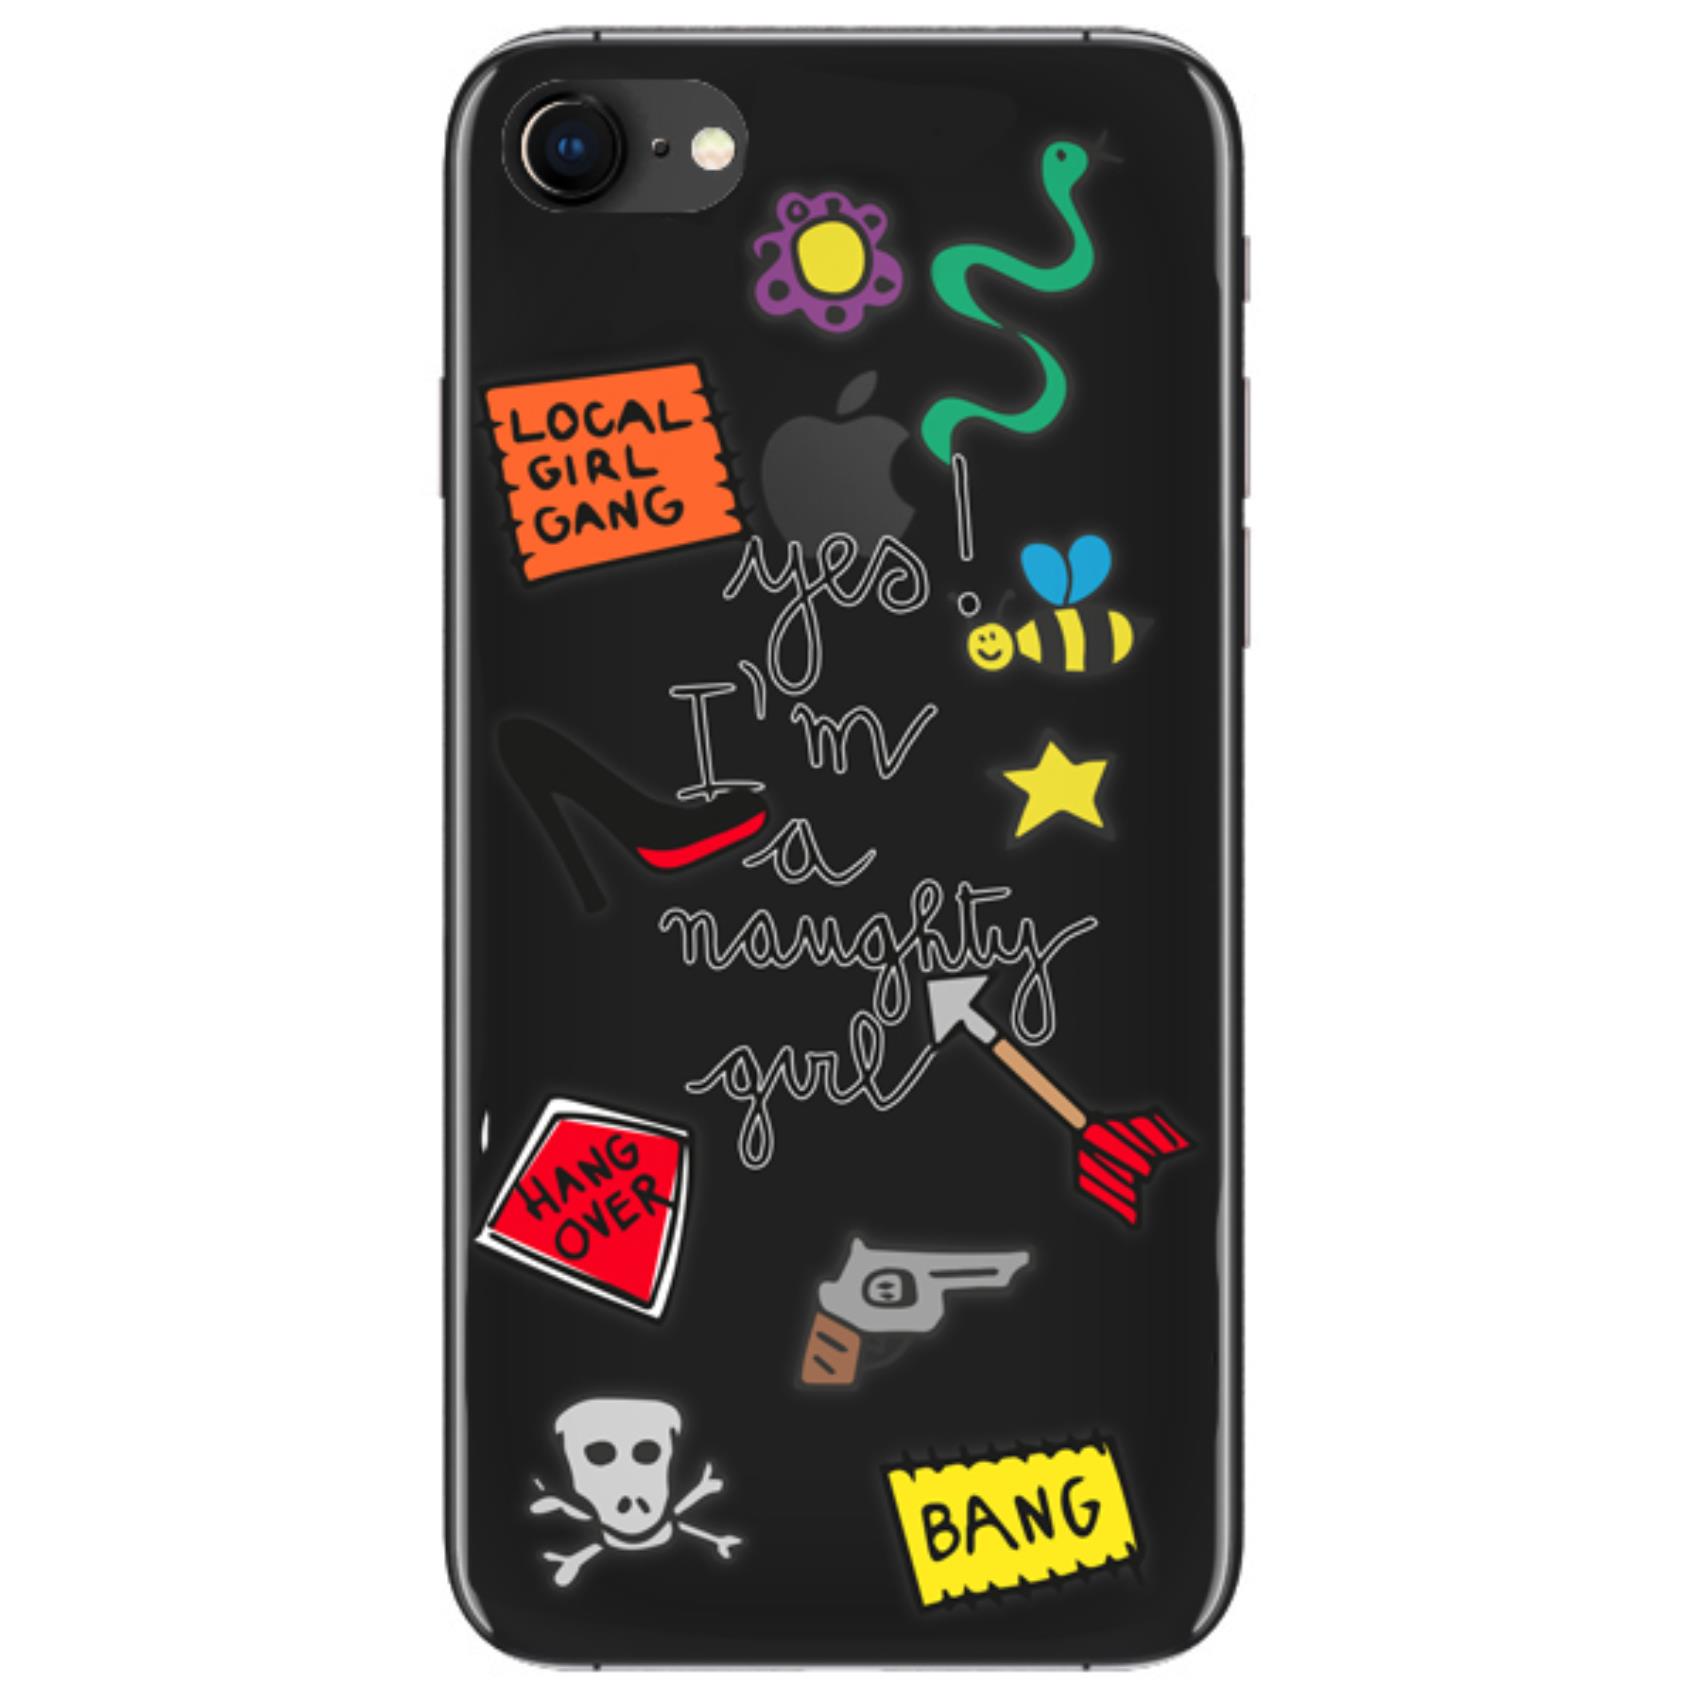 Stickers Cover Iphone Se 2020 8 7 Benjamins St8 Stknaughty 8034115952901